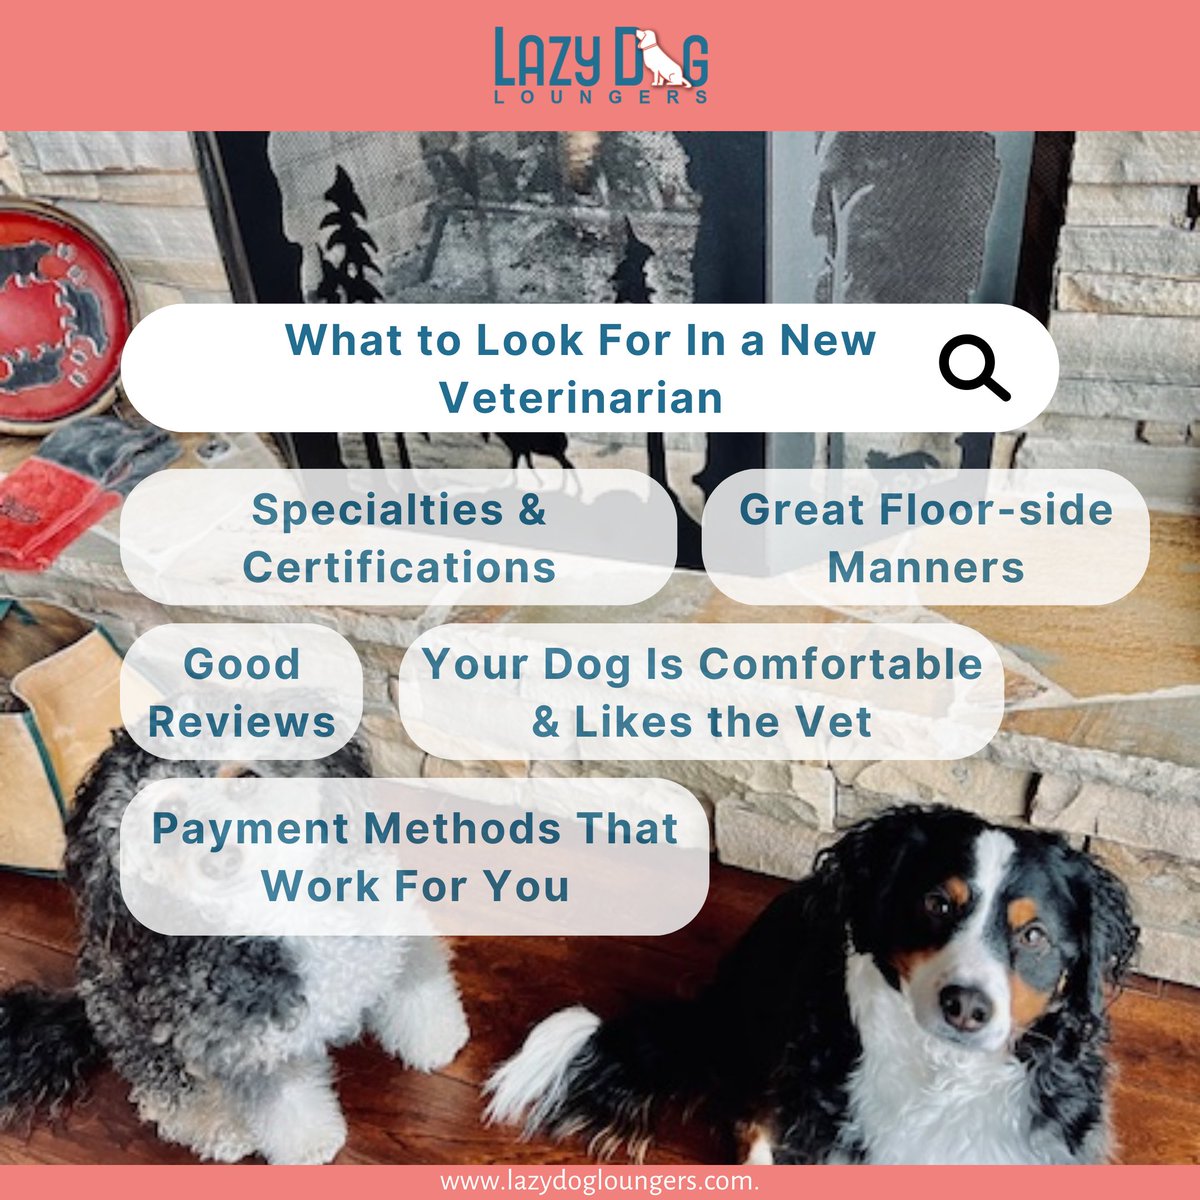 We salute all veterans and celebrate the human-animal bond. By choosing the right dog and creating a comfortable home environment, veterans and their furry companions can embark on a happy and fulfilling journey together!

#VeteransAndDogs #ServiceAnimals #FureverCompanions